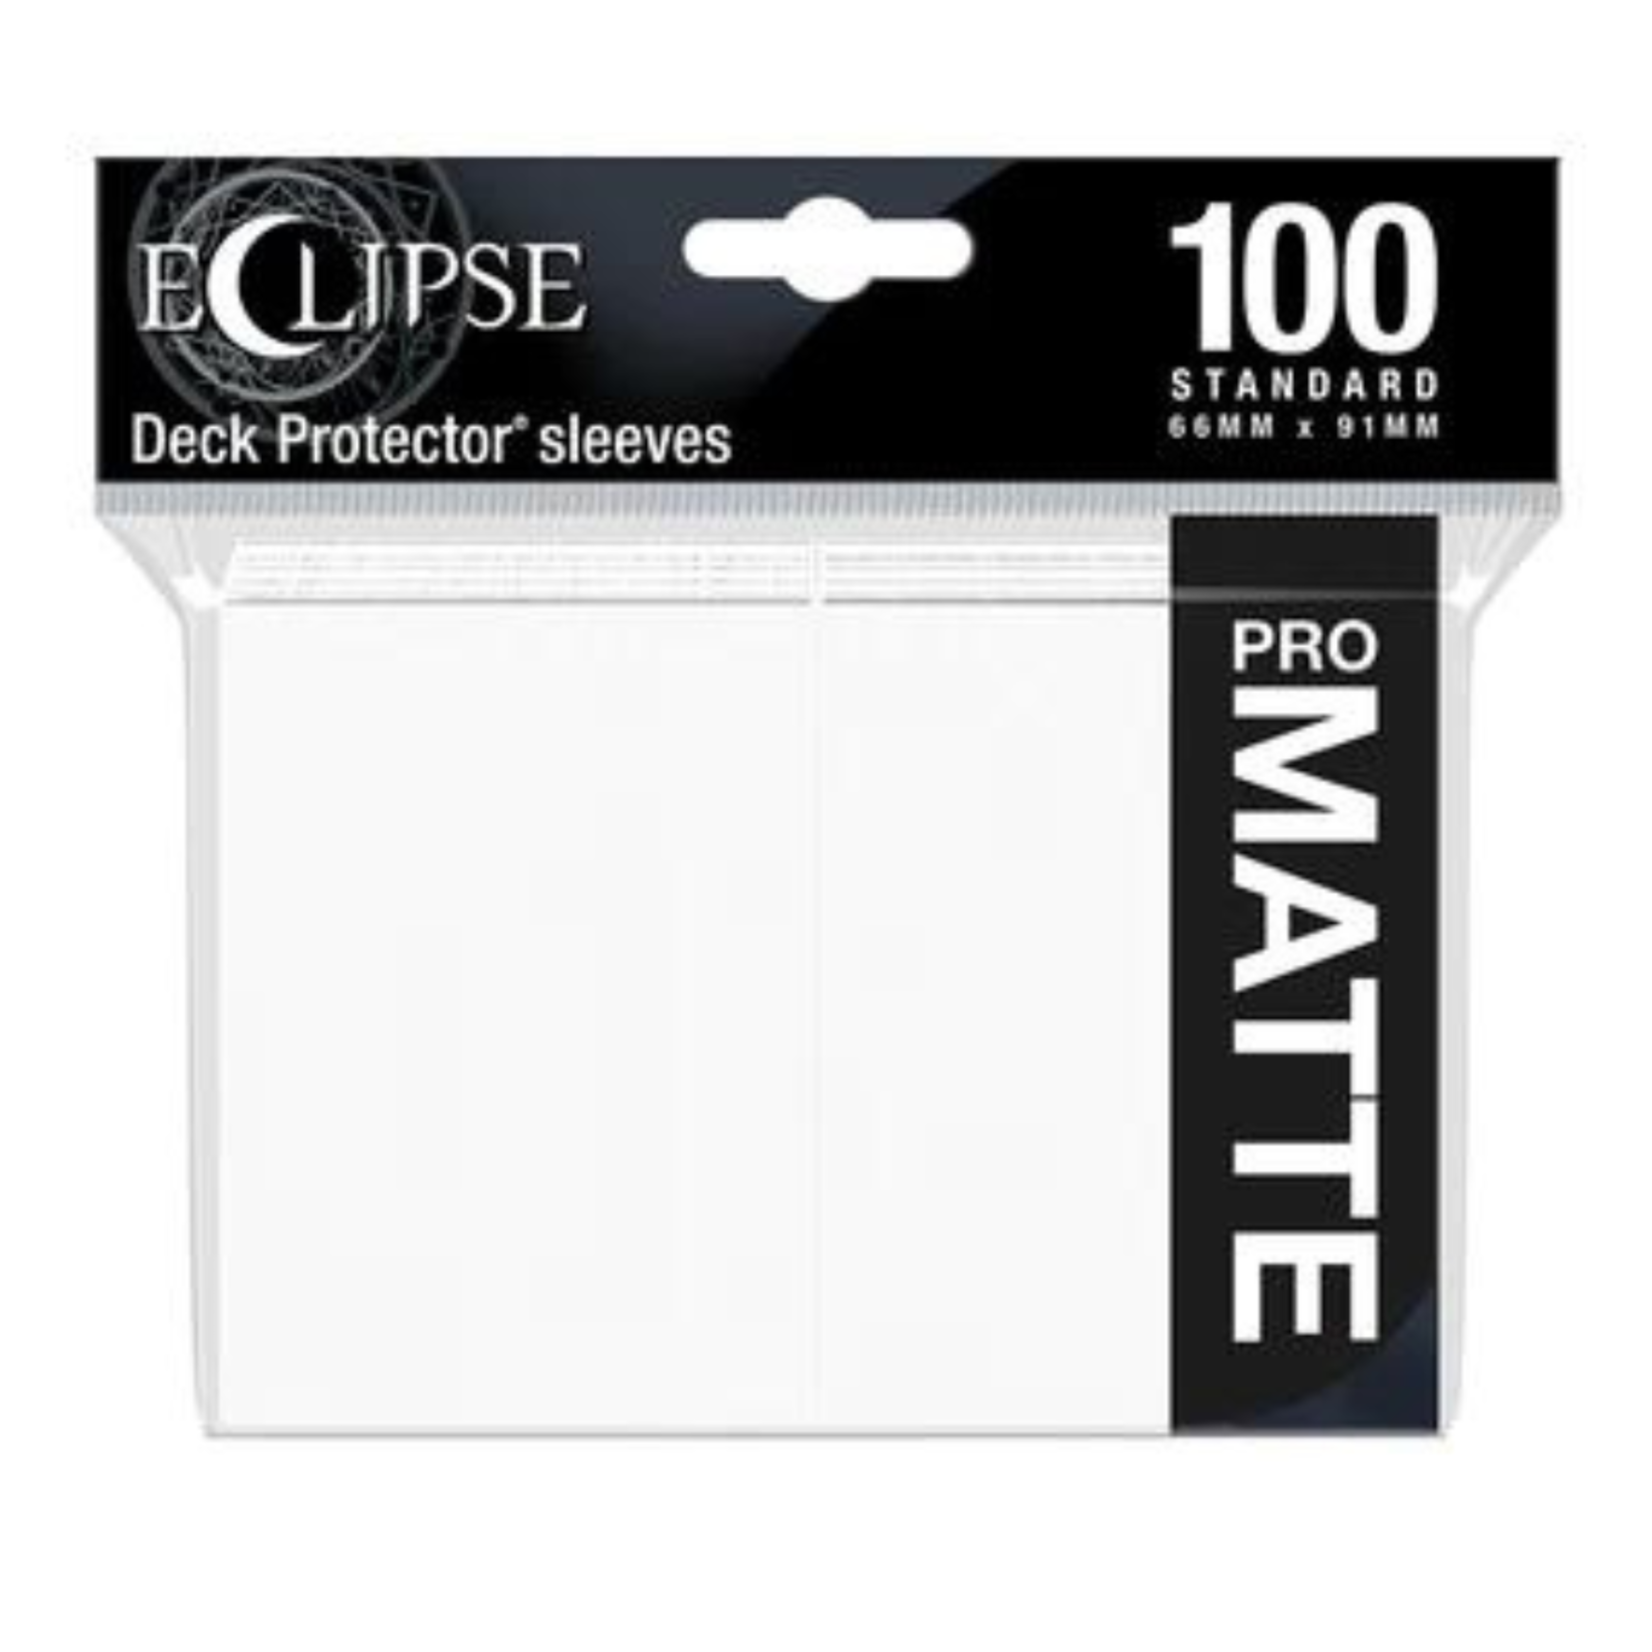 Ultra Pro Sleeves Eclipse - 100 ct Arctic White Matte